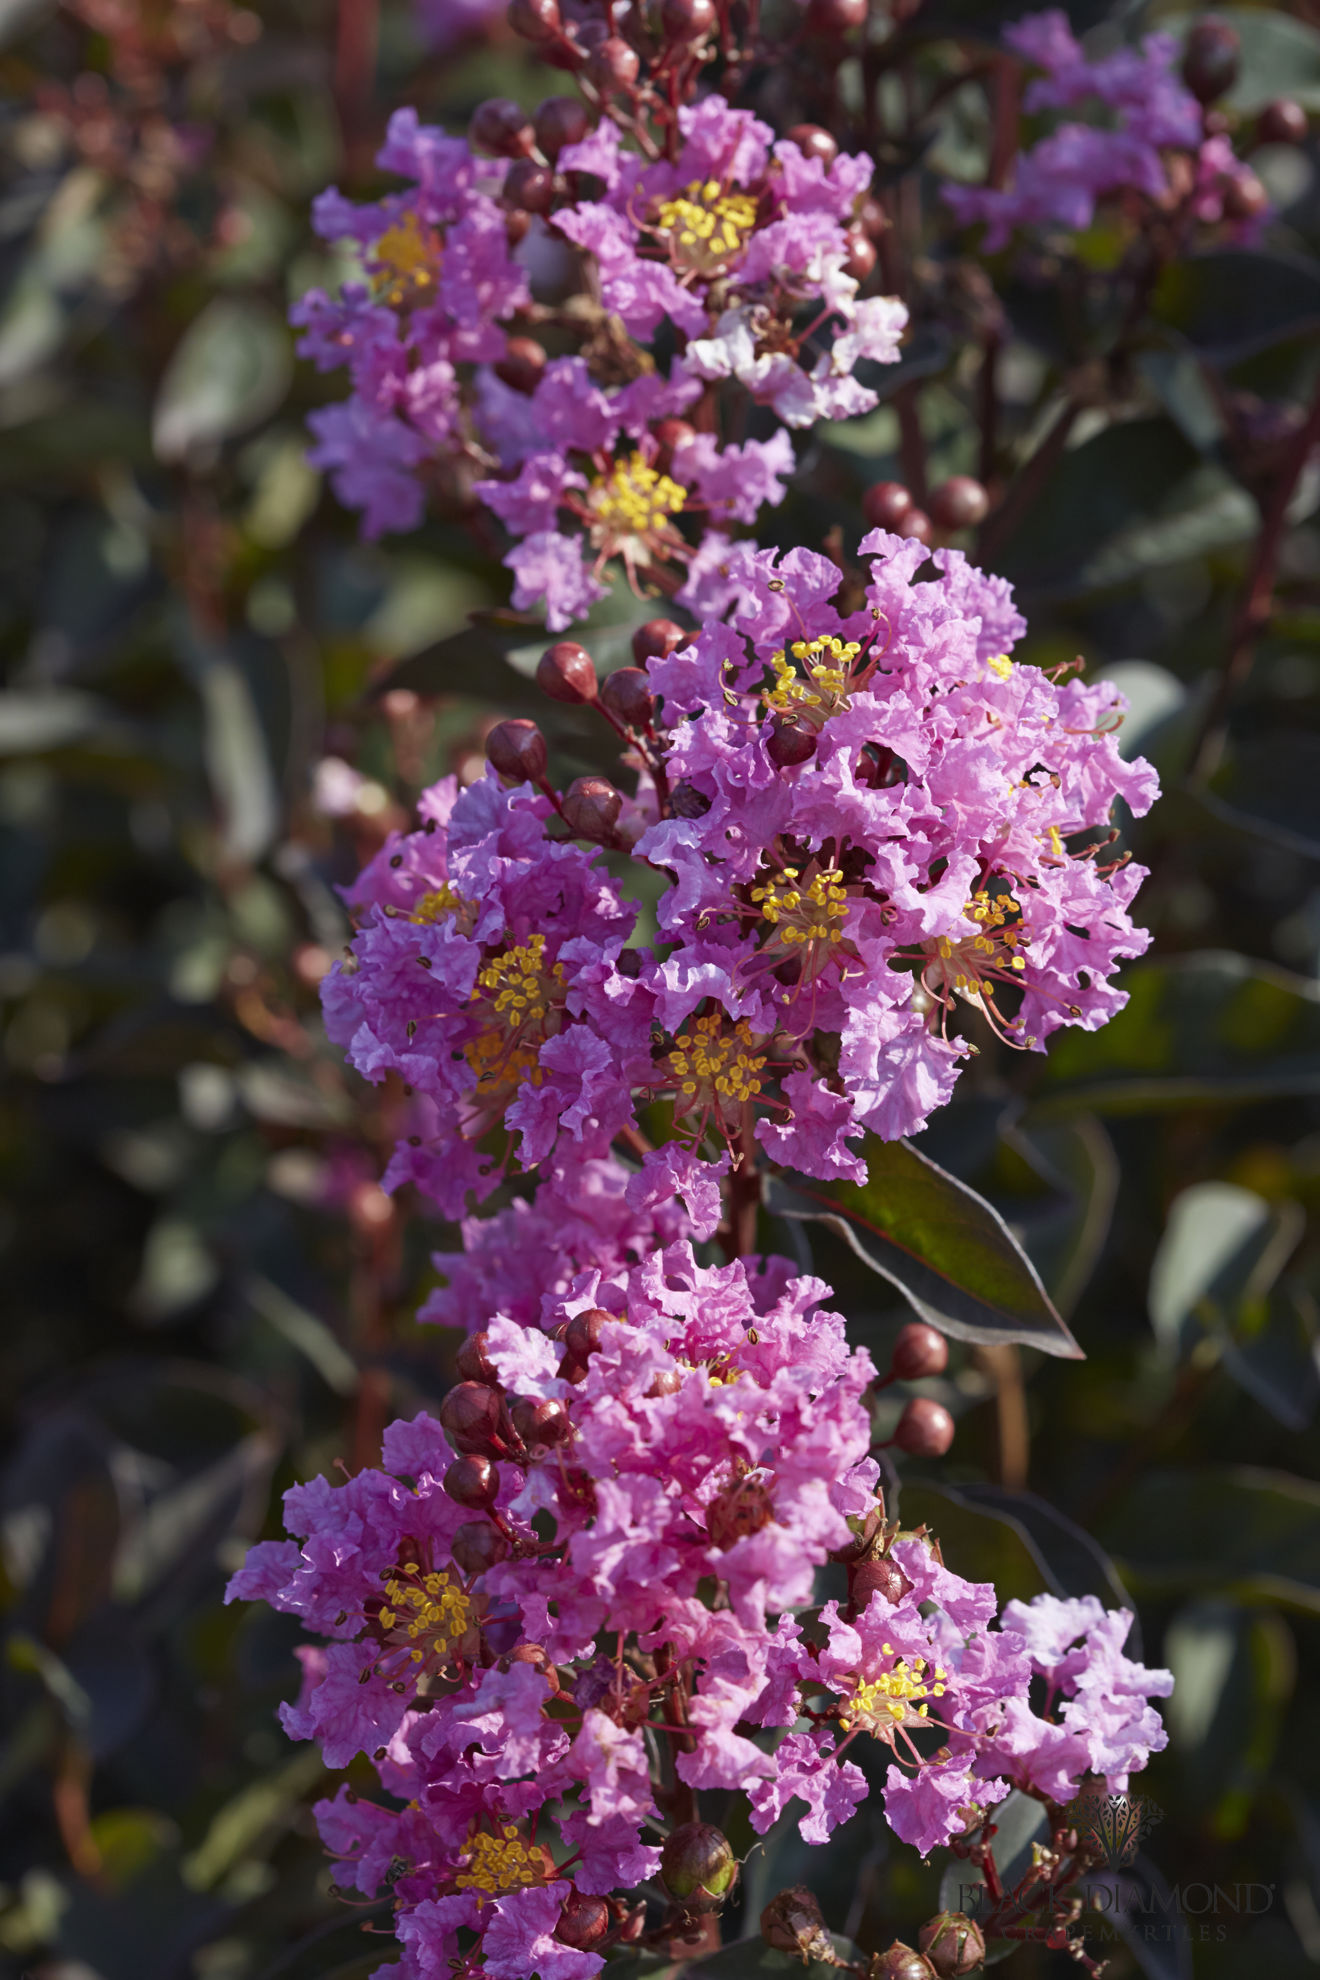 https://www.breederplants.nl/images/thumbs/0002018_Lagerstroemia 'Lavender Lace' (1).jpeg